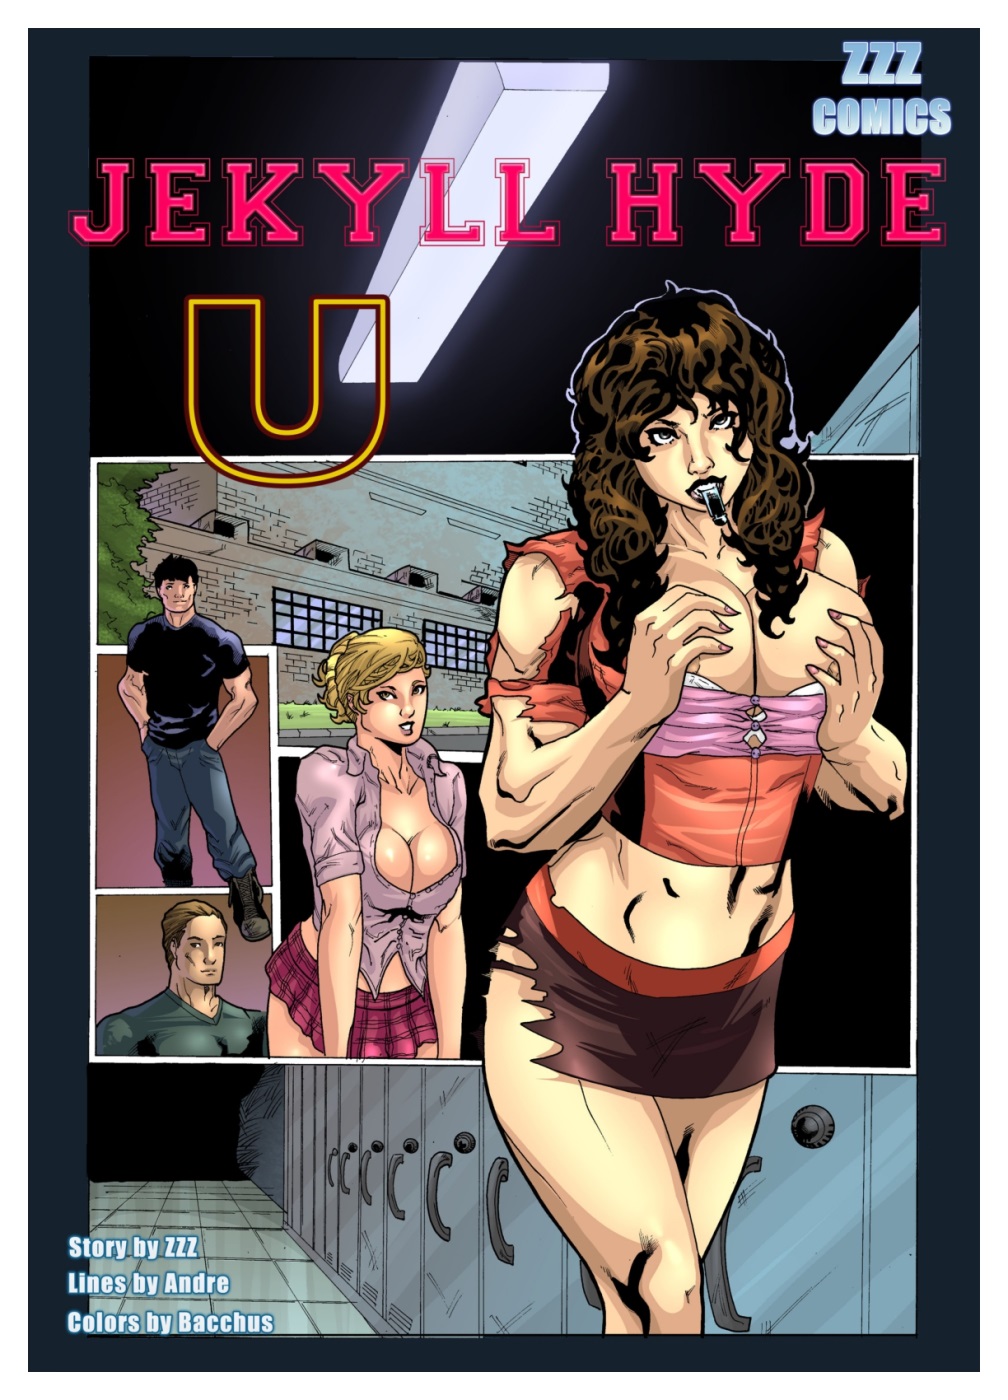 Jekyll and hyde female comic porn